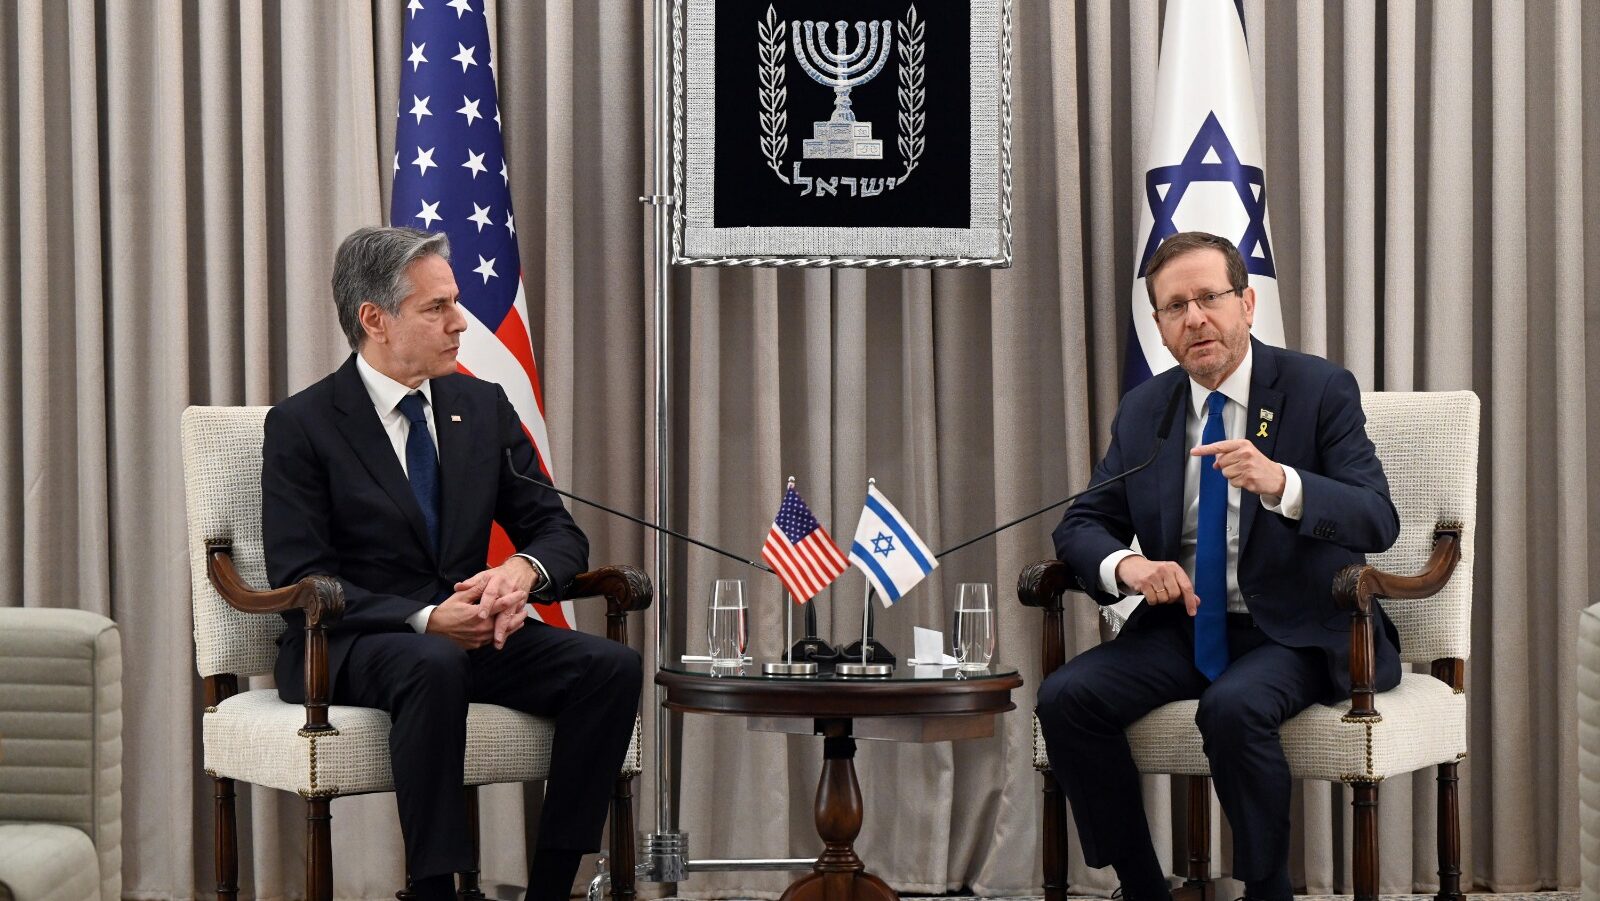 Blinken Meets With Netanyahu, Herzog, Reafirms US Support for Palestinian State